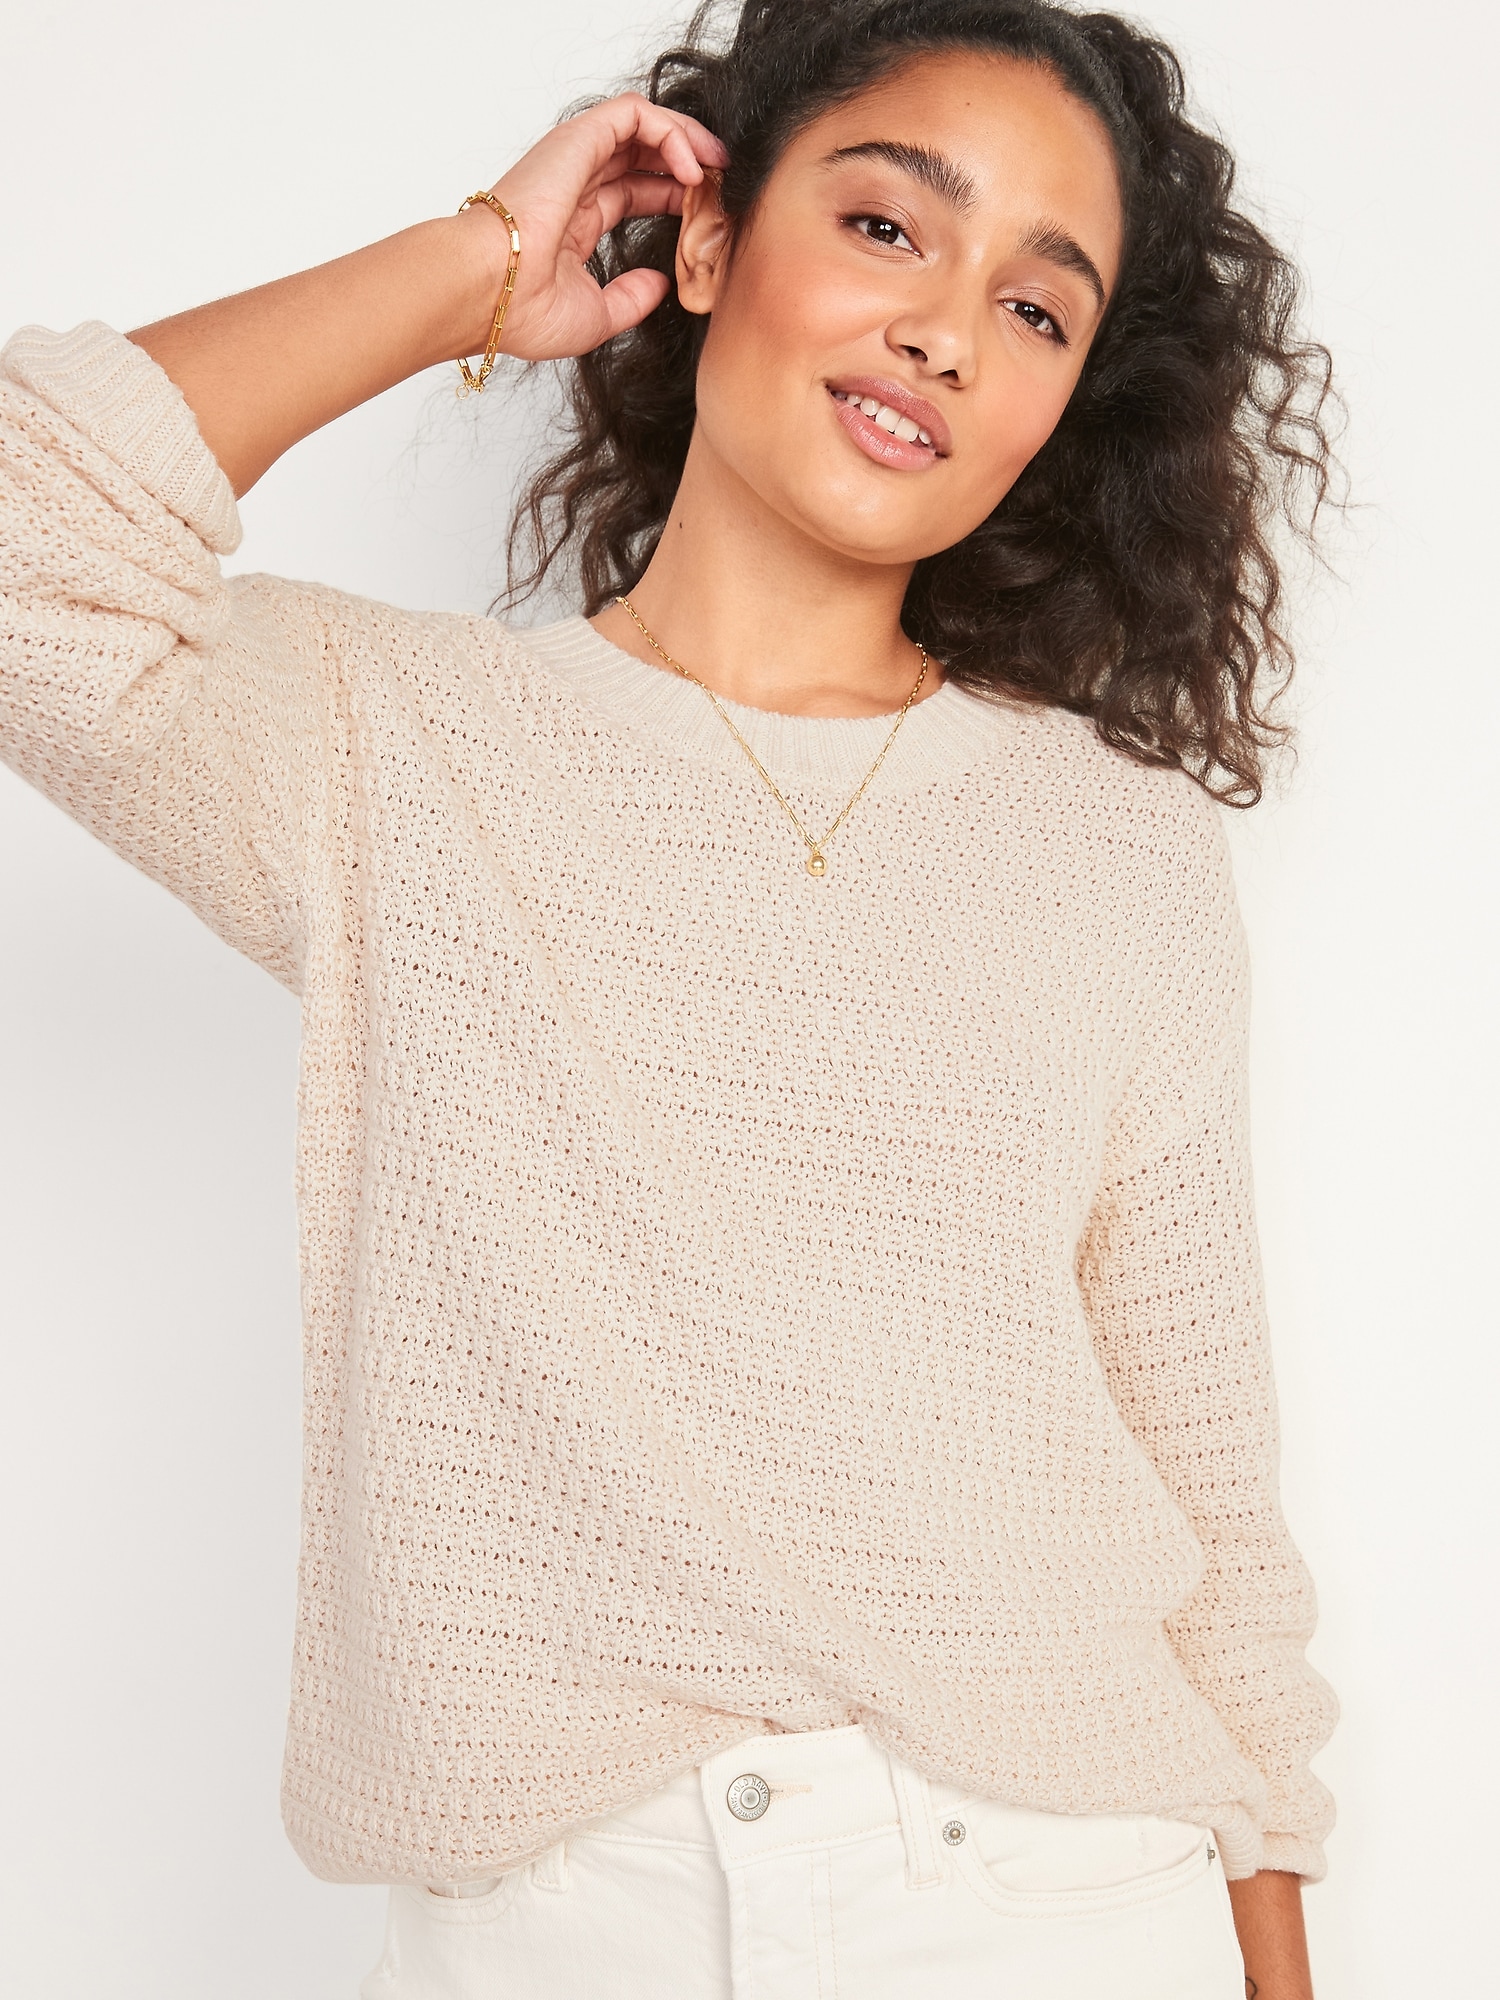 old navy tunic sweater - By Lauren M